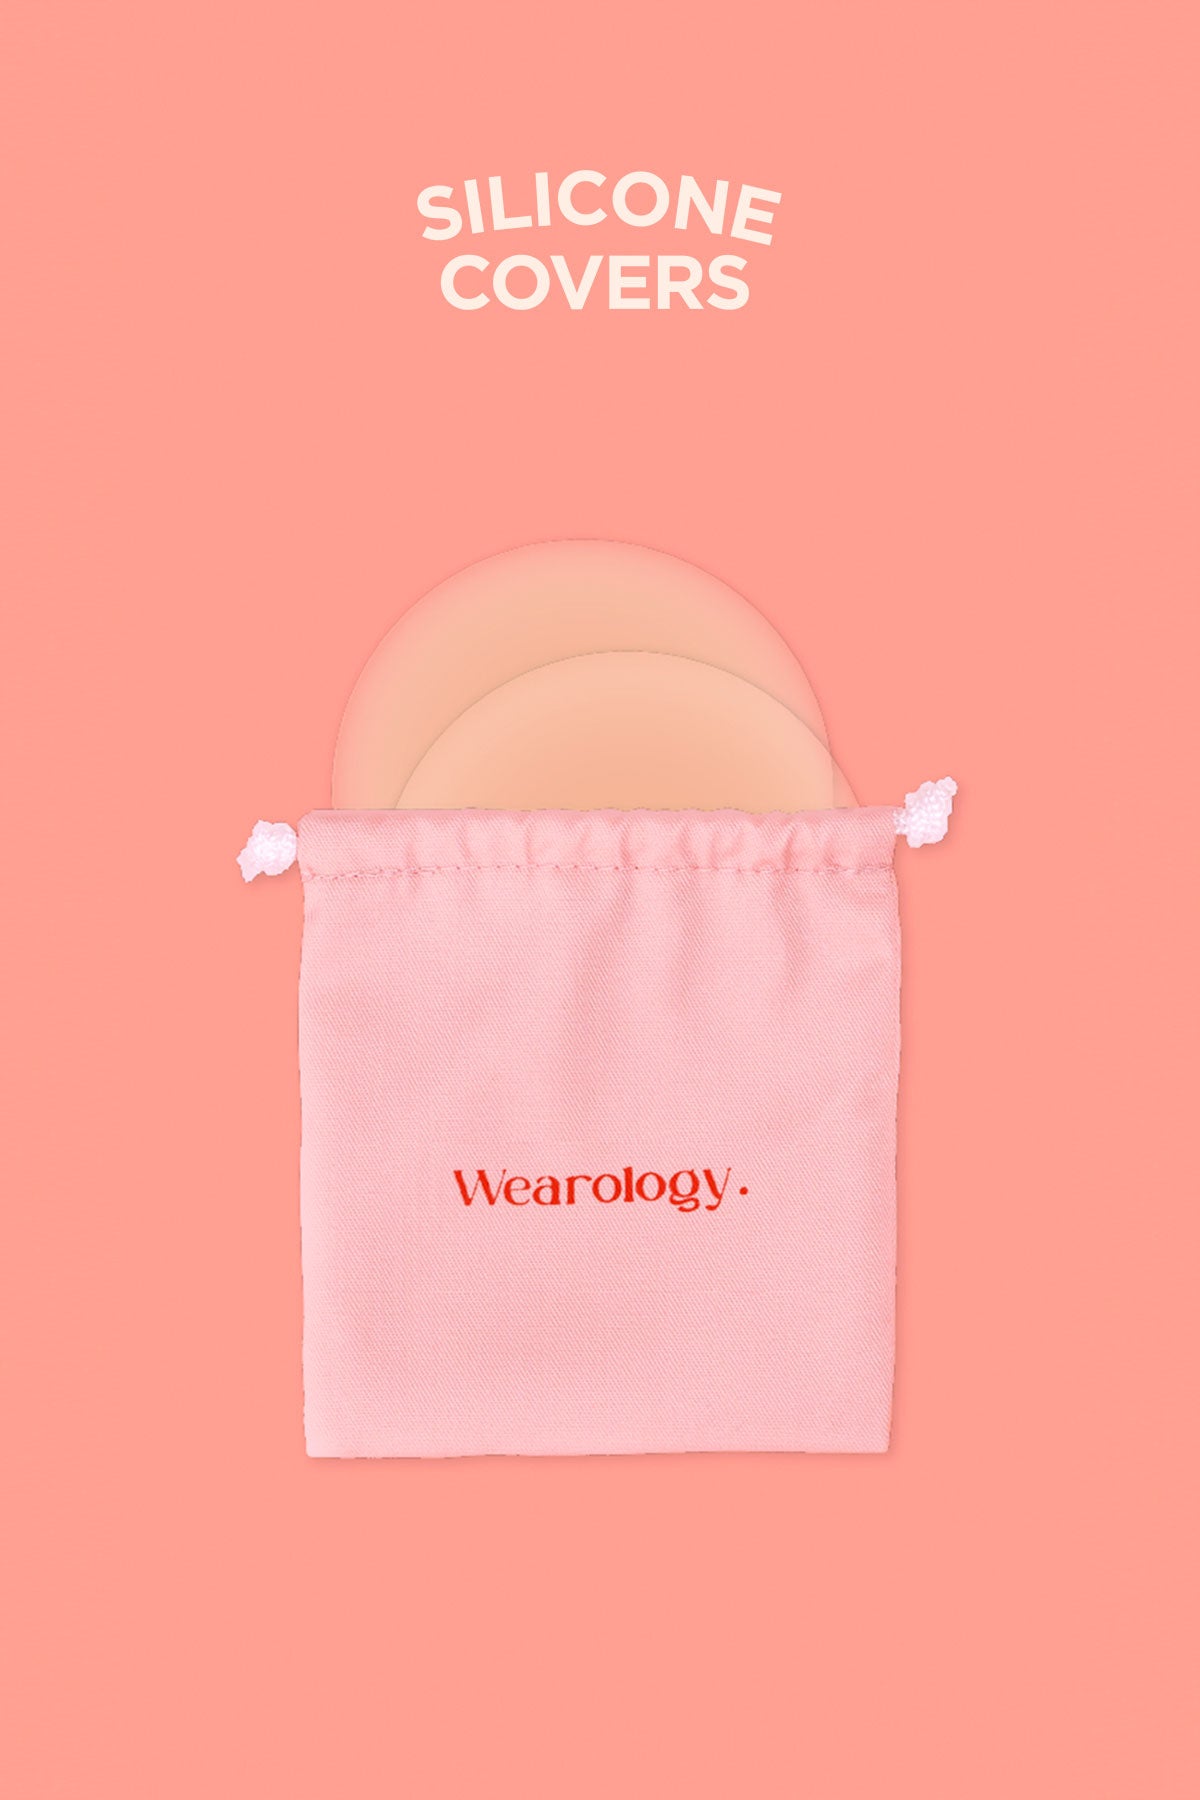 Wearology Premium Seamless Silicone Covers